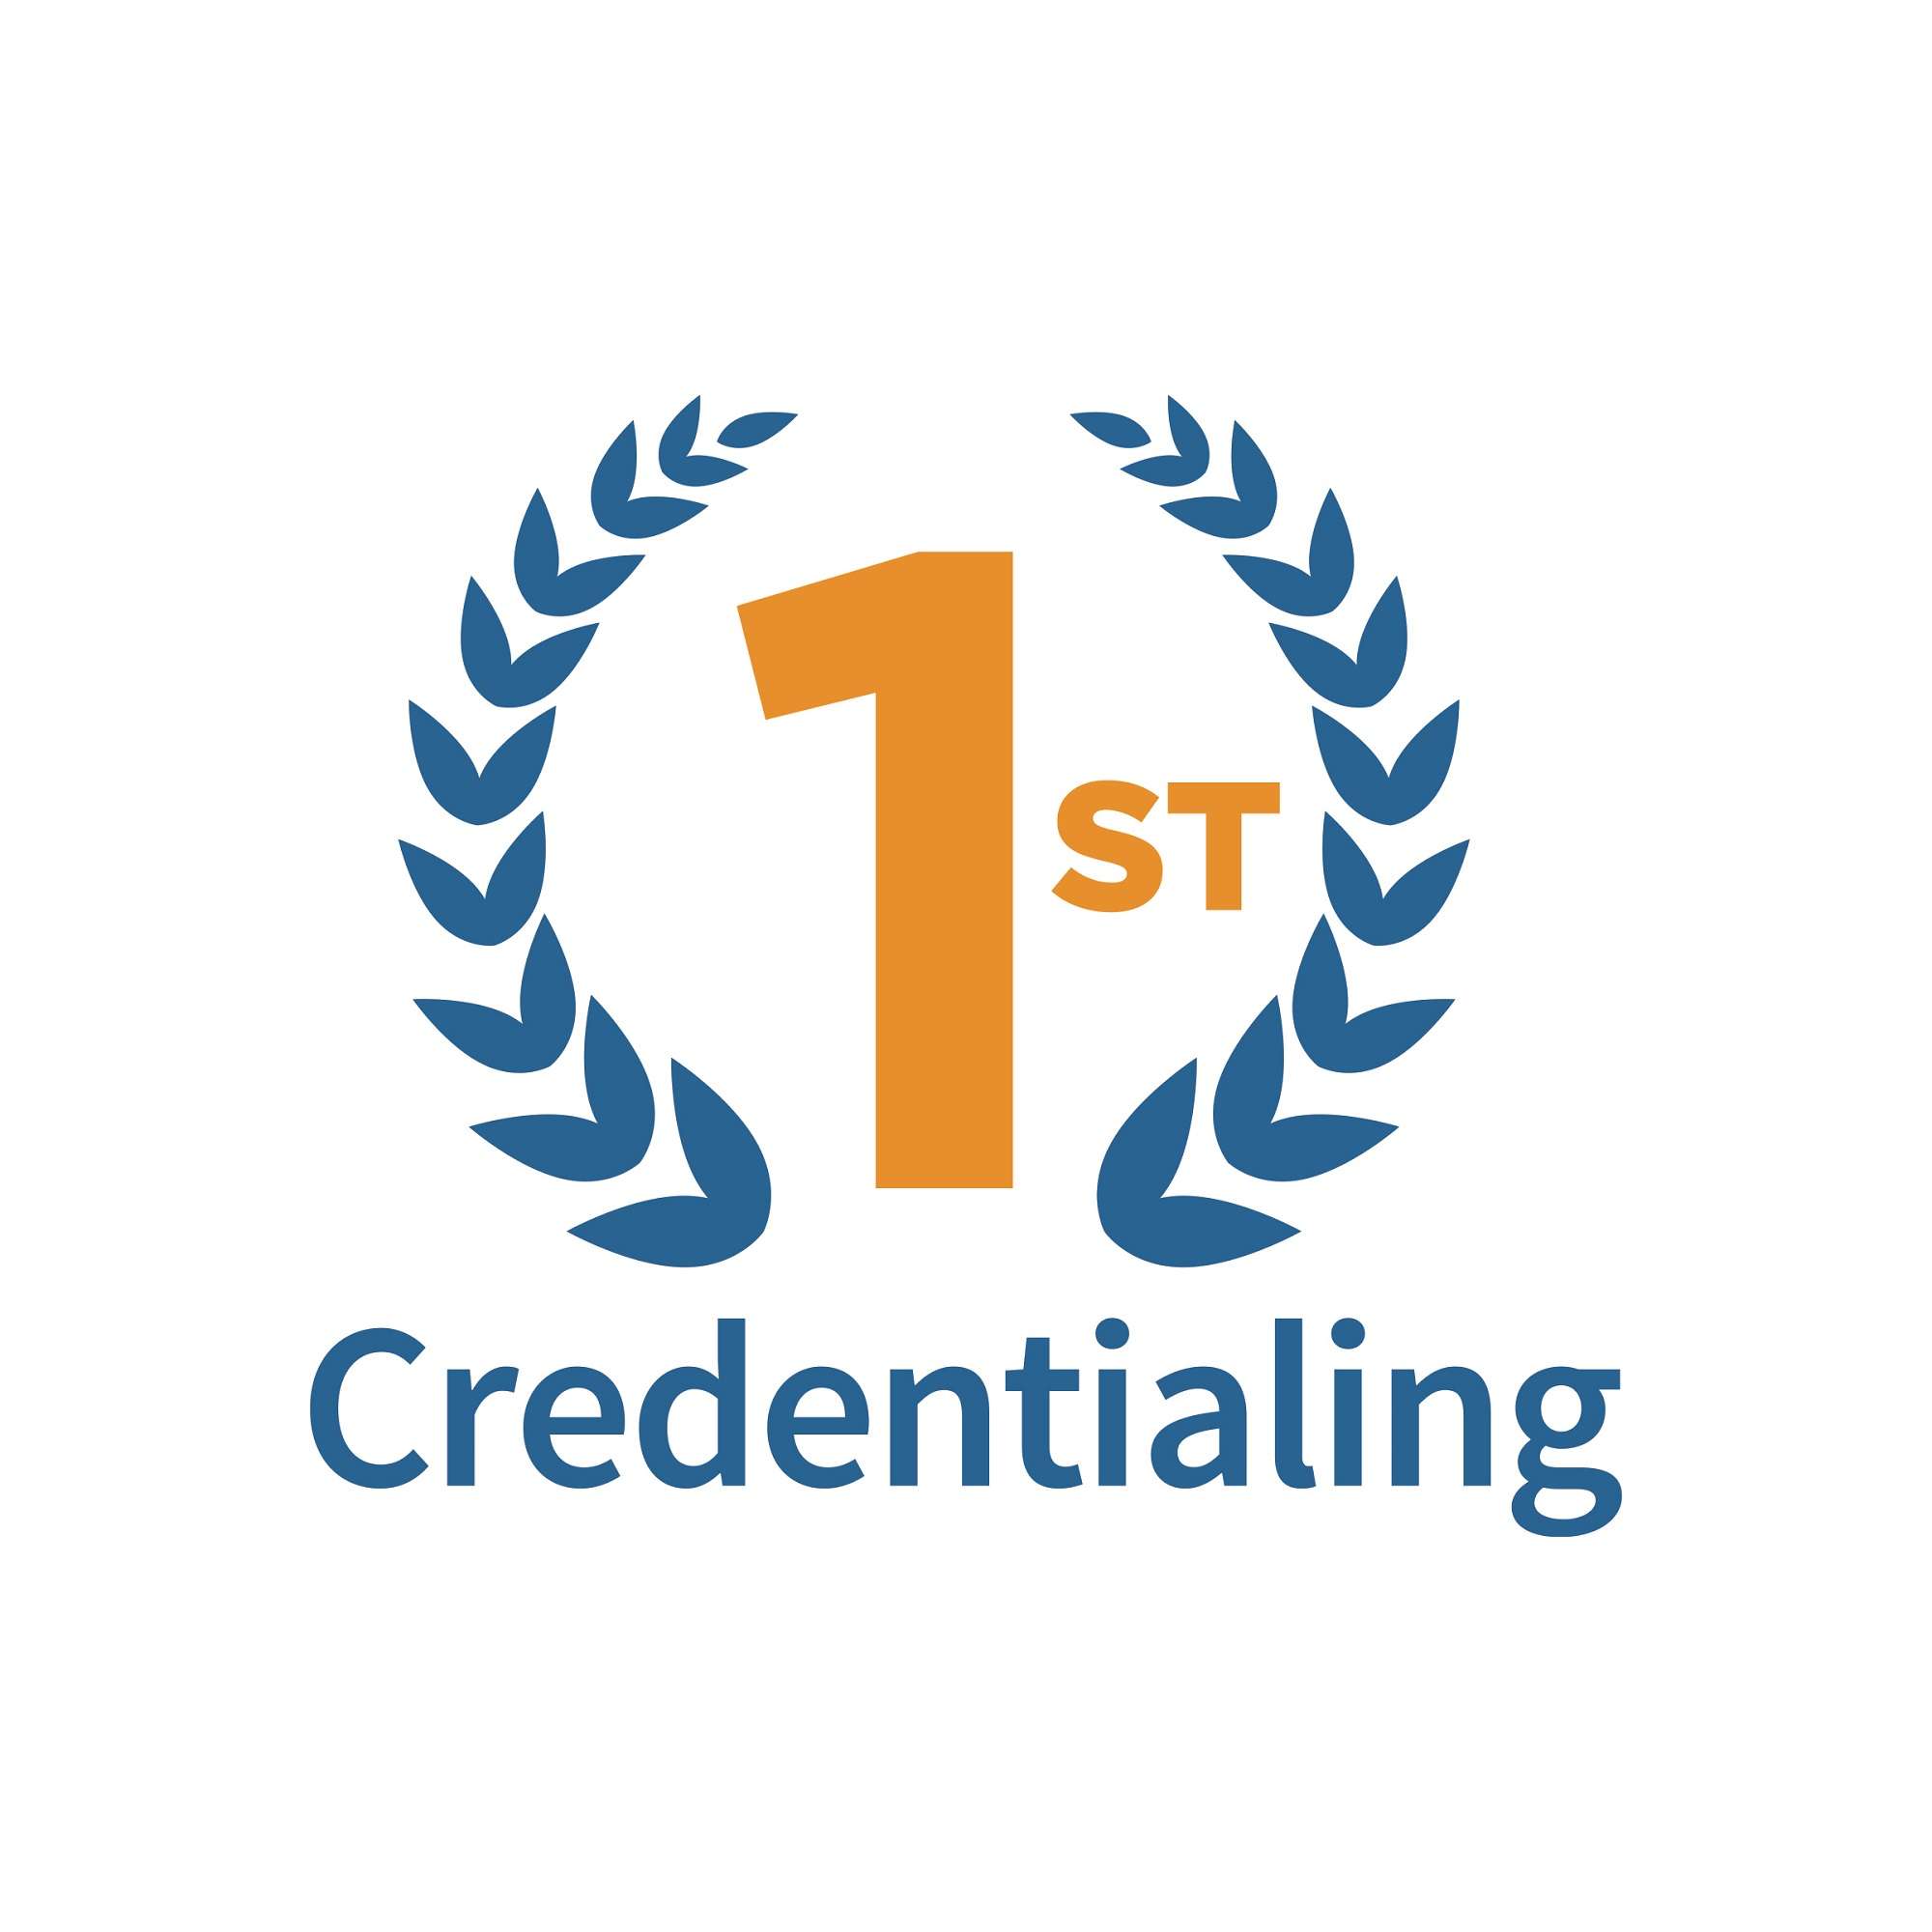 1st Credentialing Logo